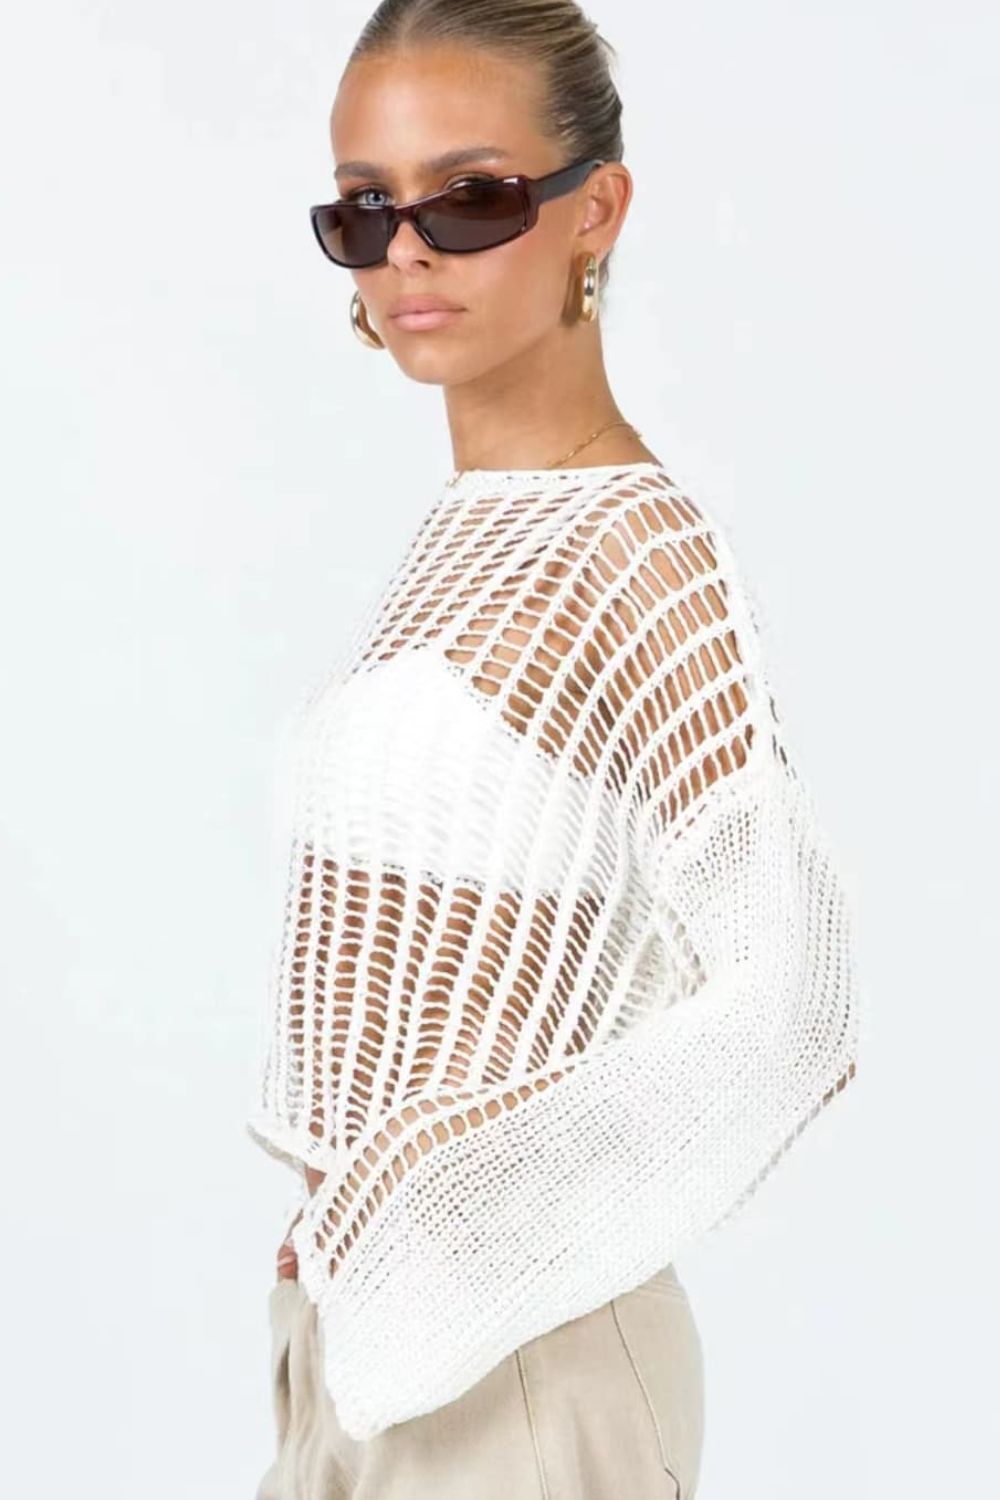 Openwork Boat Neck Long Sleeve Cover Up in 4 Color Choices in Size S, M, L, or XL